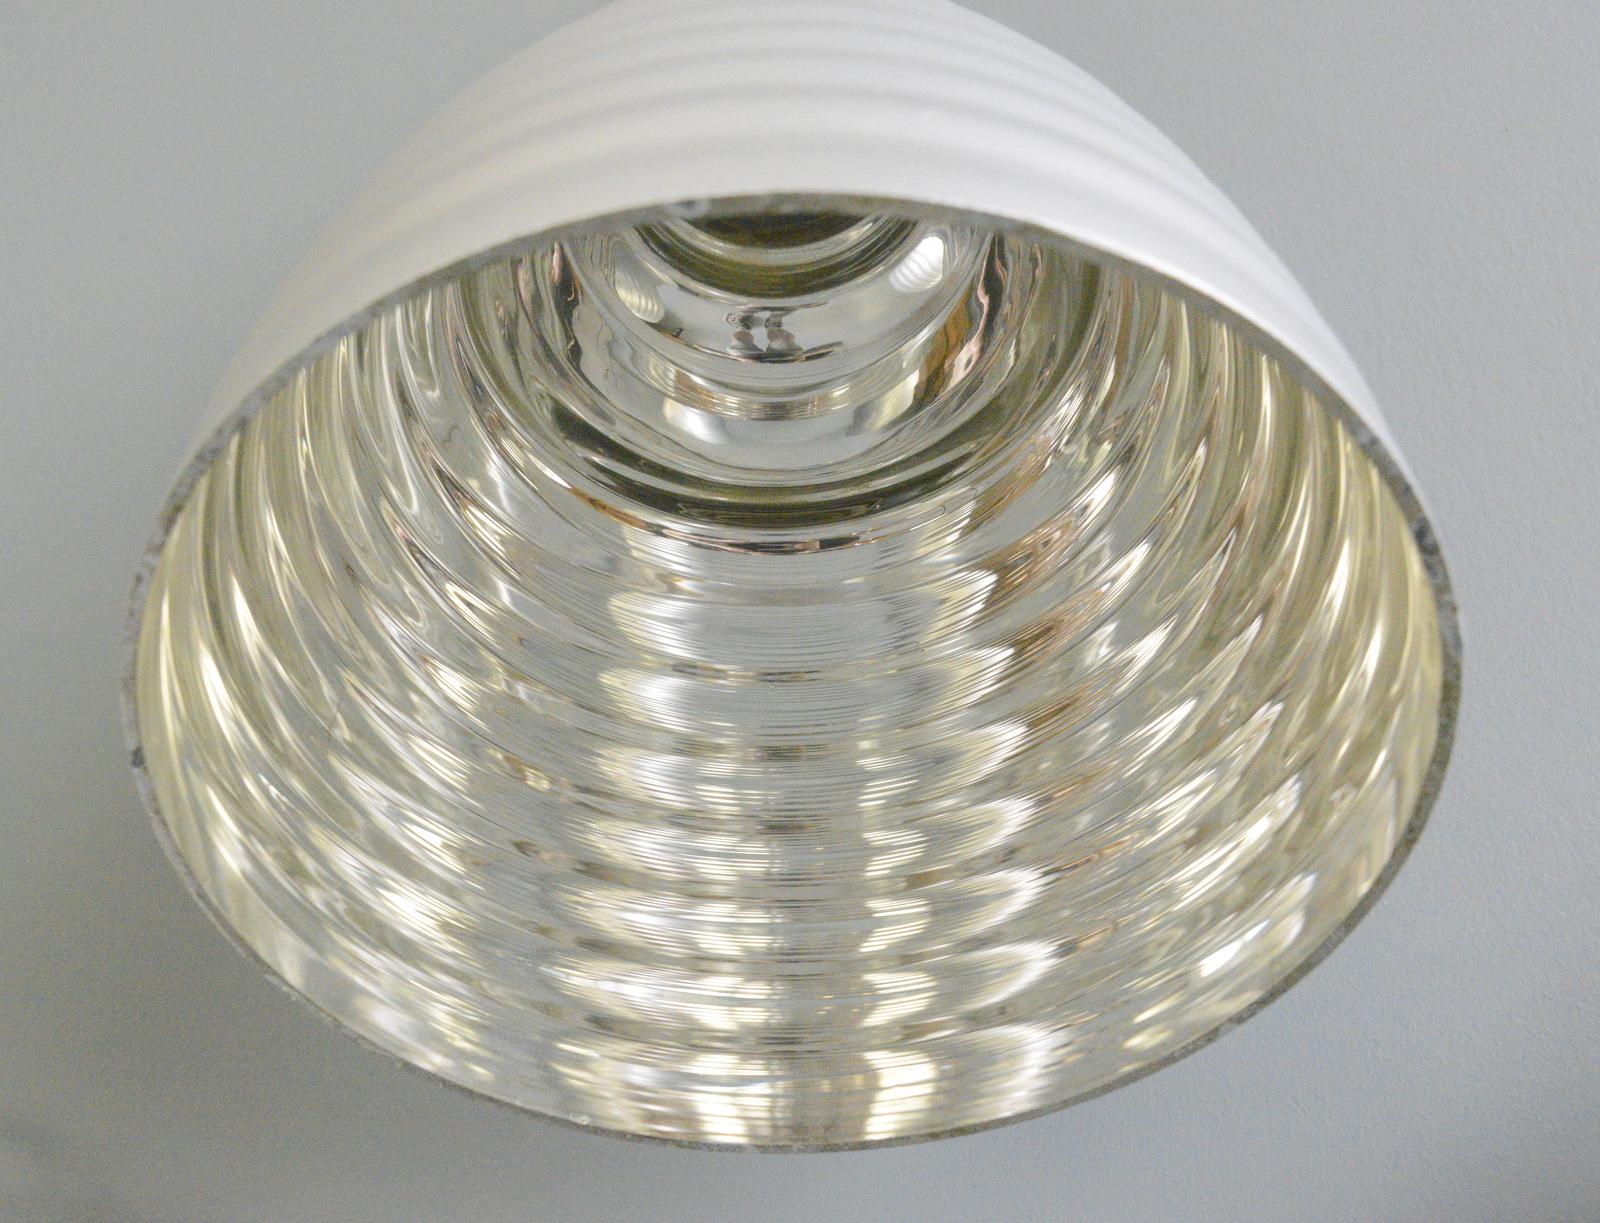 Mid-20th Century Mercury Glass Wall Lights By Zeiss Ikon Circa 1930s For Sale